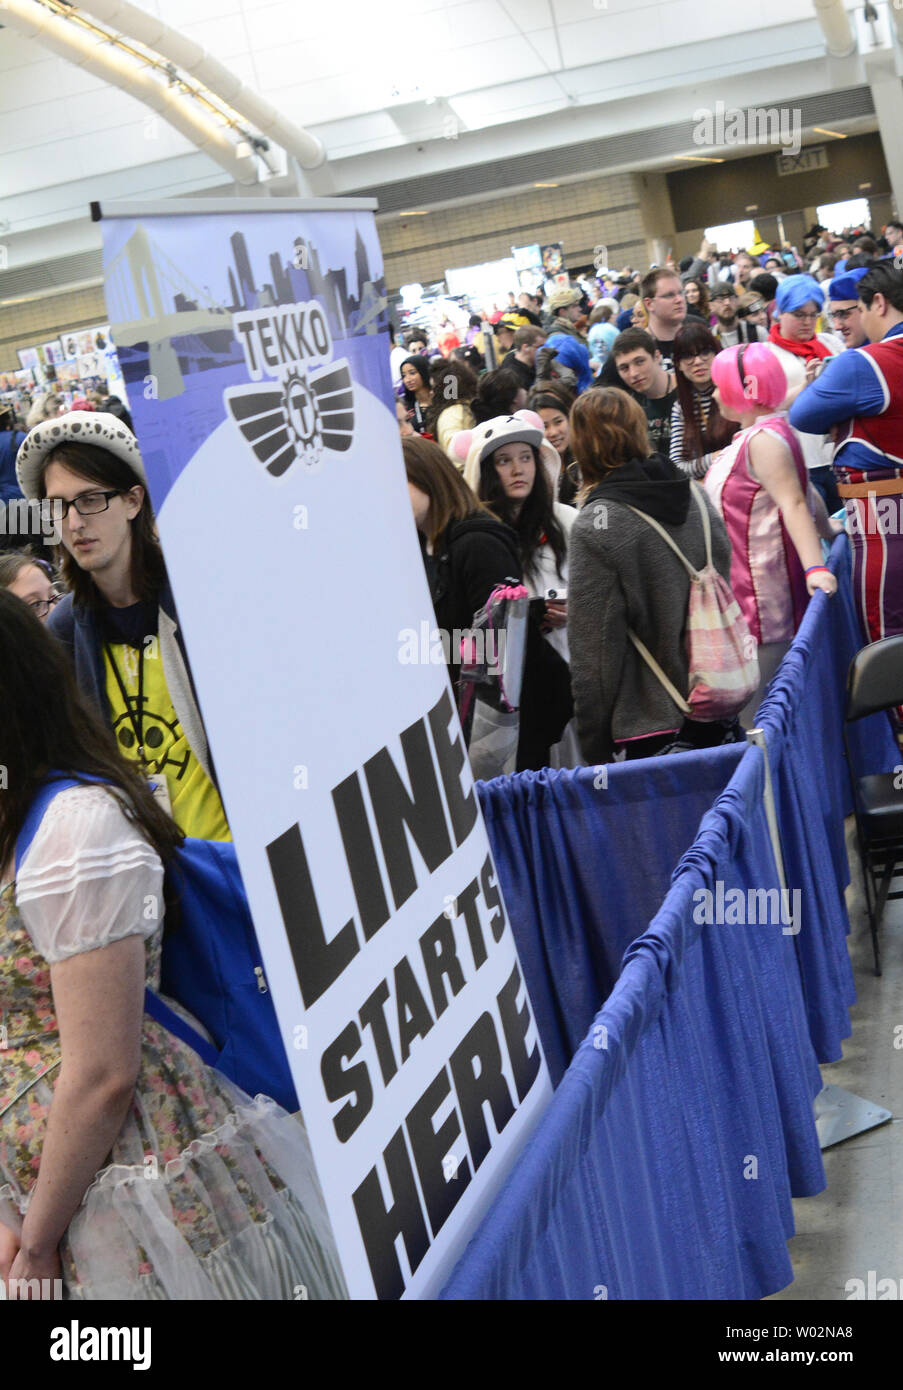 The autograph line for Vic Mignoga stretches the length of the exhibit hall at Tekko, a Japanese Pop Culture festival, in the David Lawrence Convention Center in Pittsburgh on April 7, 2018.   Photo by Archie Carpenter/UPI Stock Photo